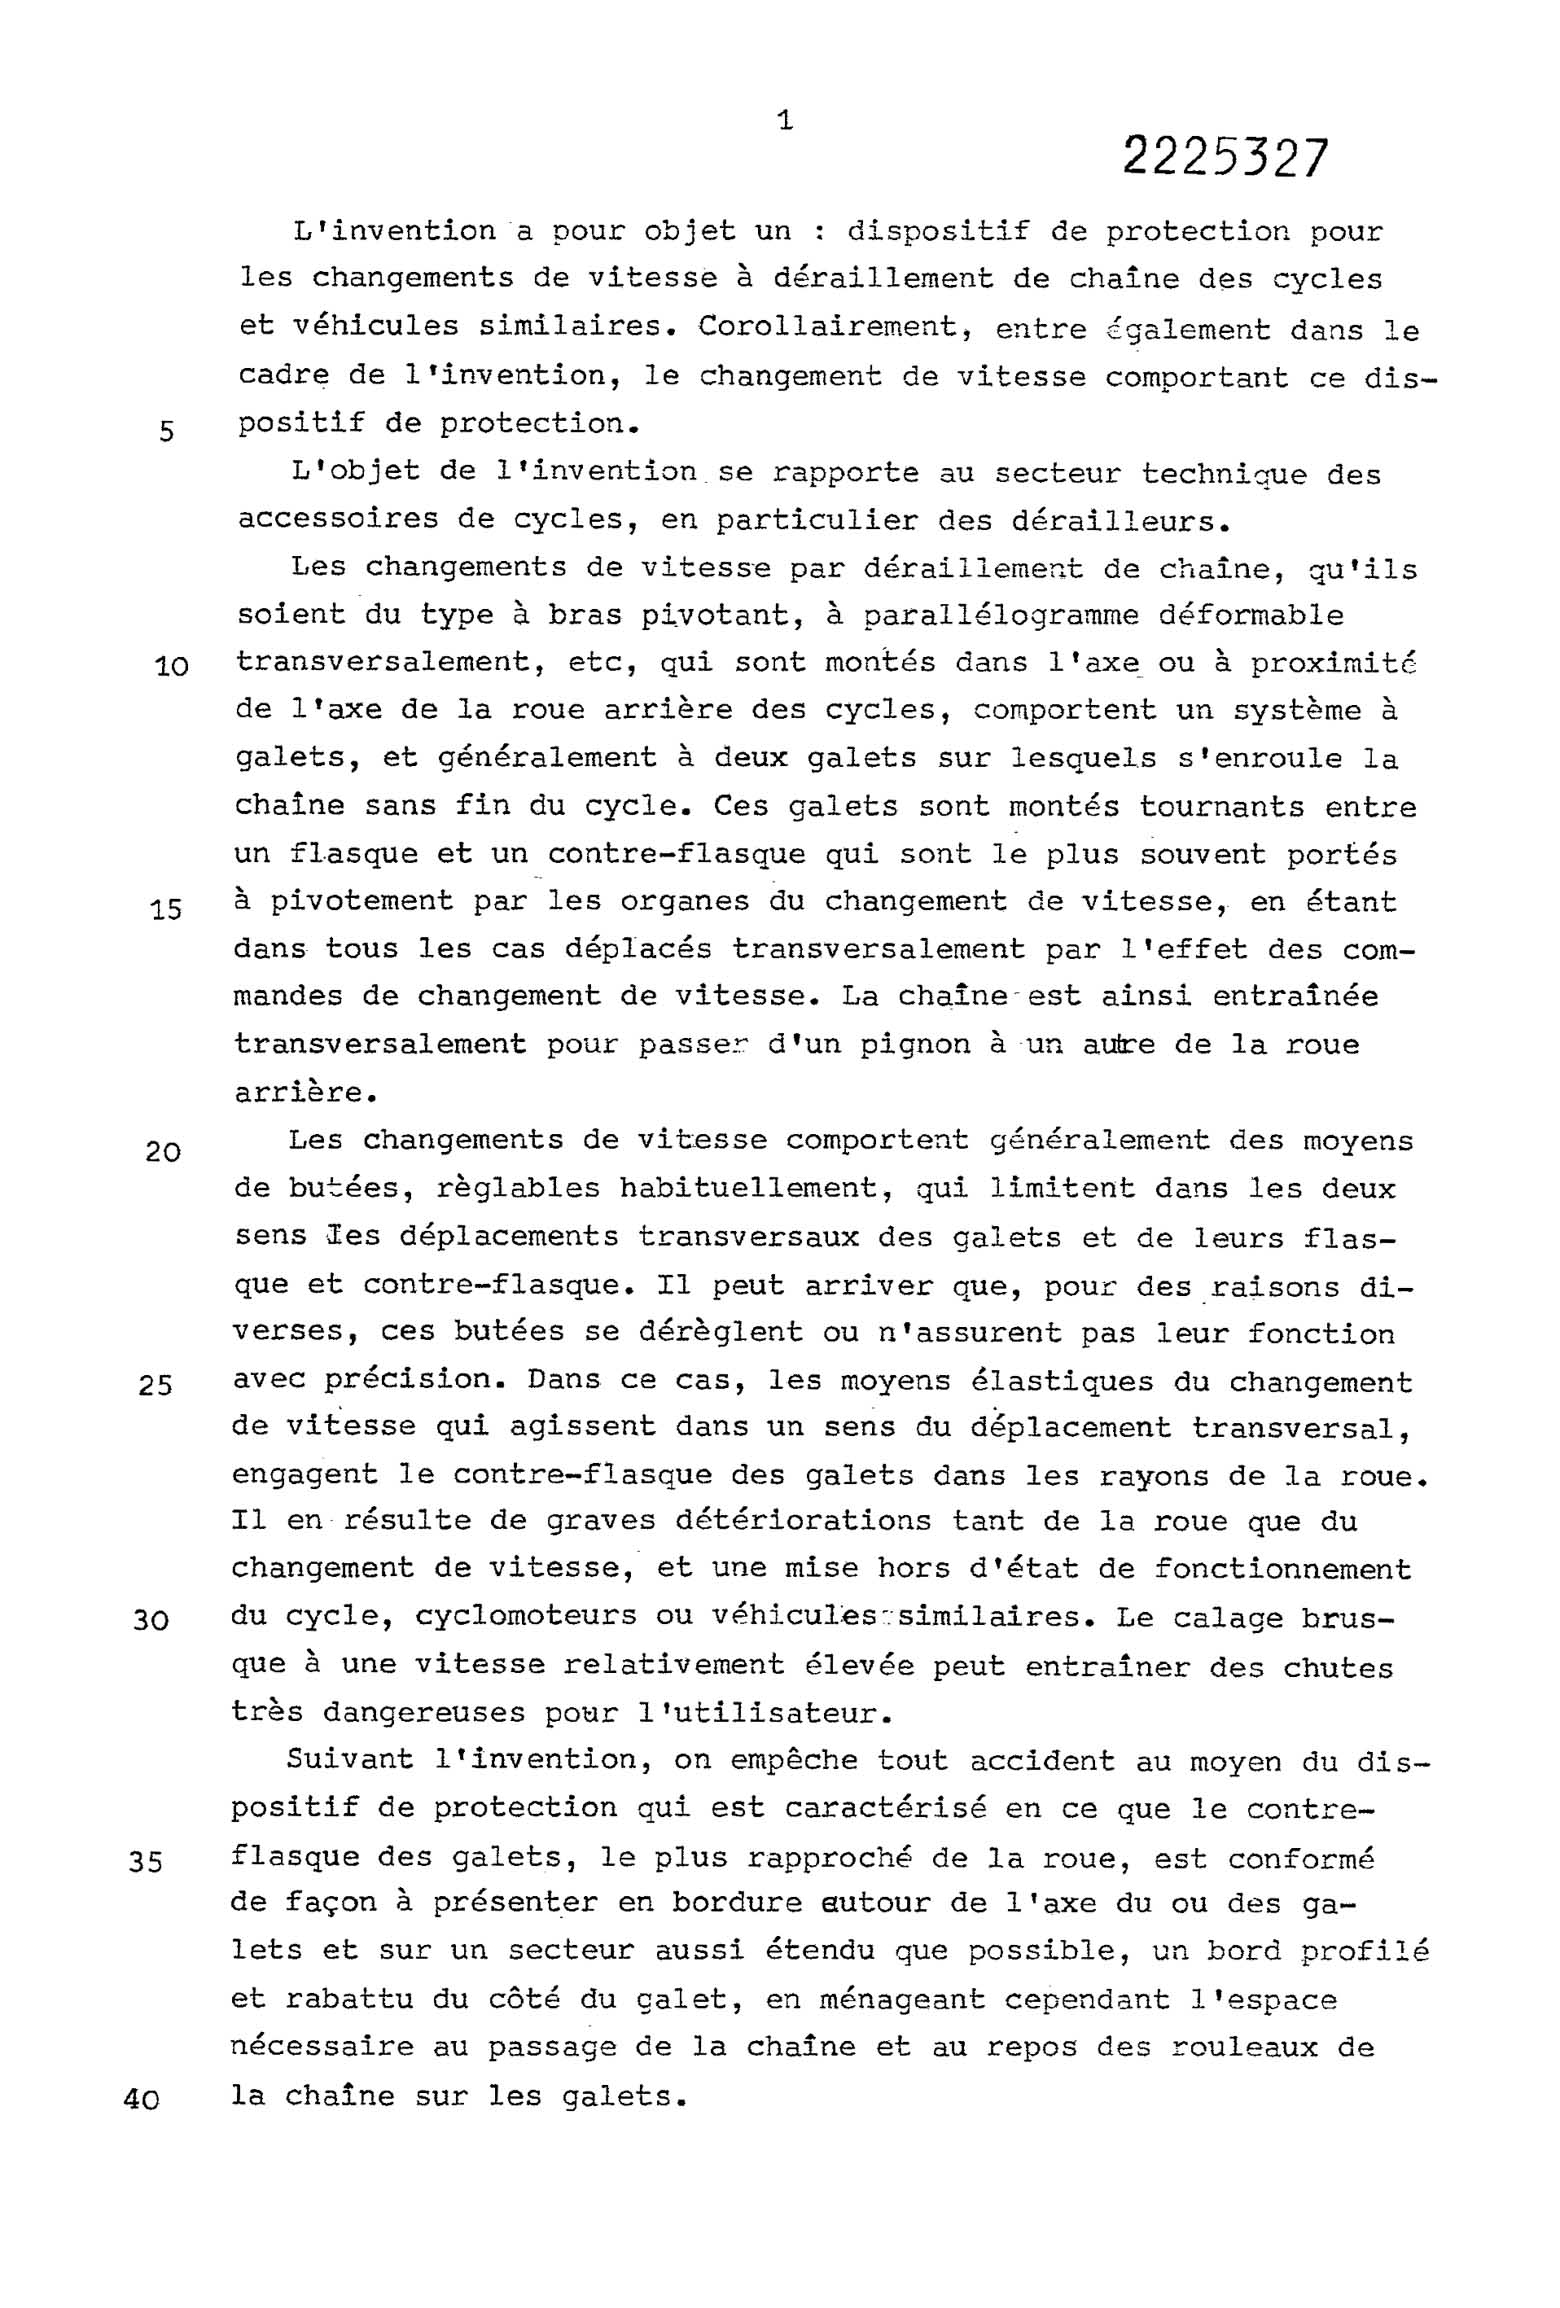 French Patent 2,225,327 - Simplex scan 002 main image